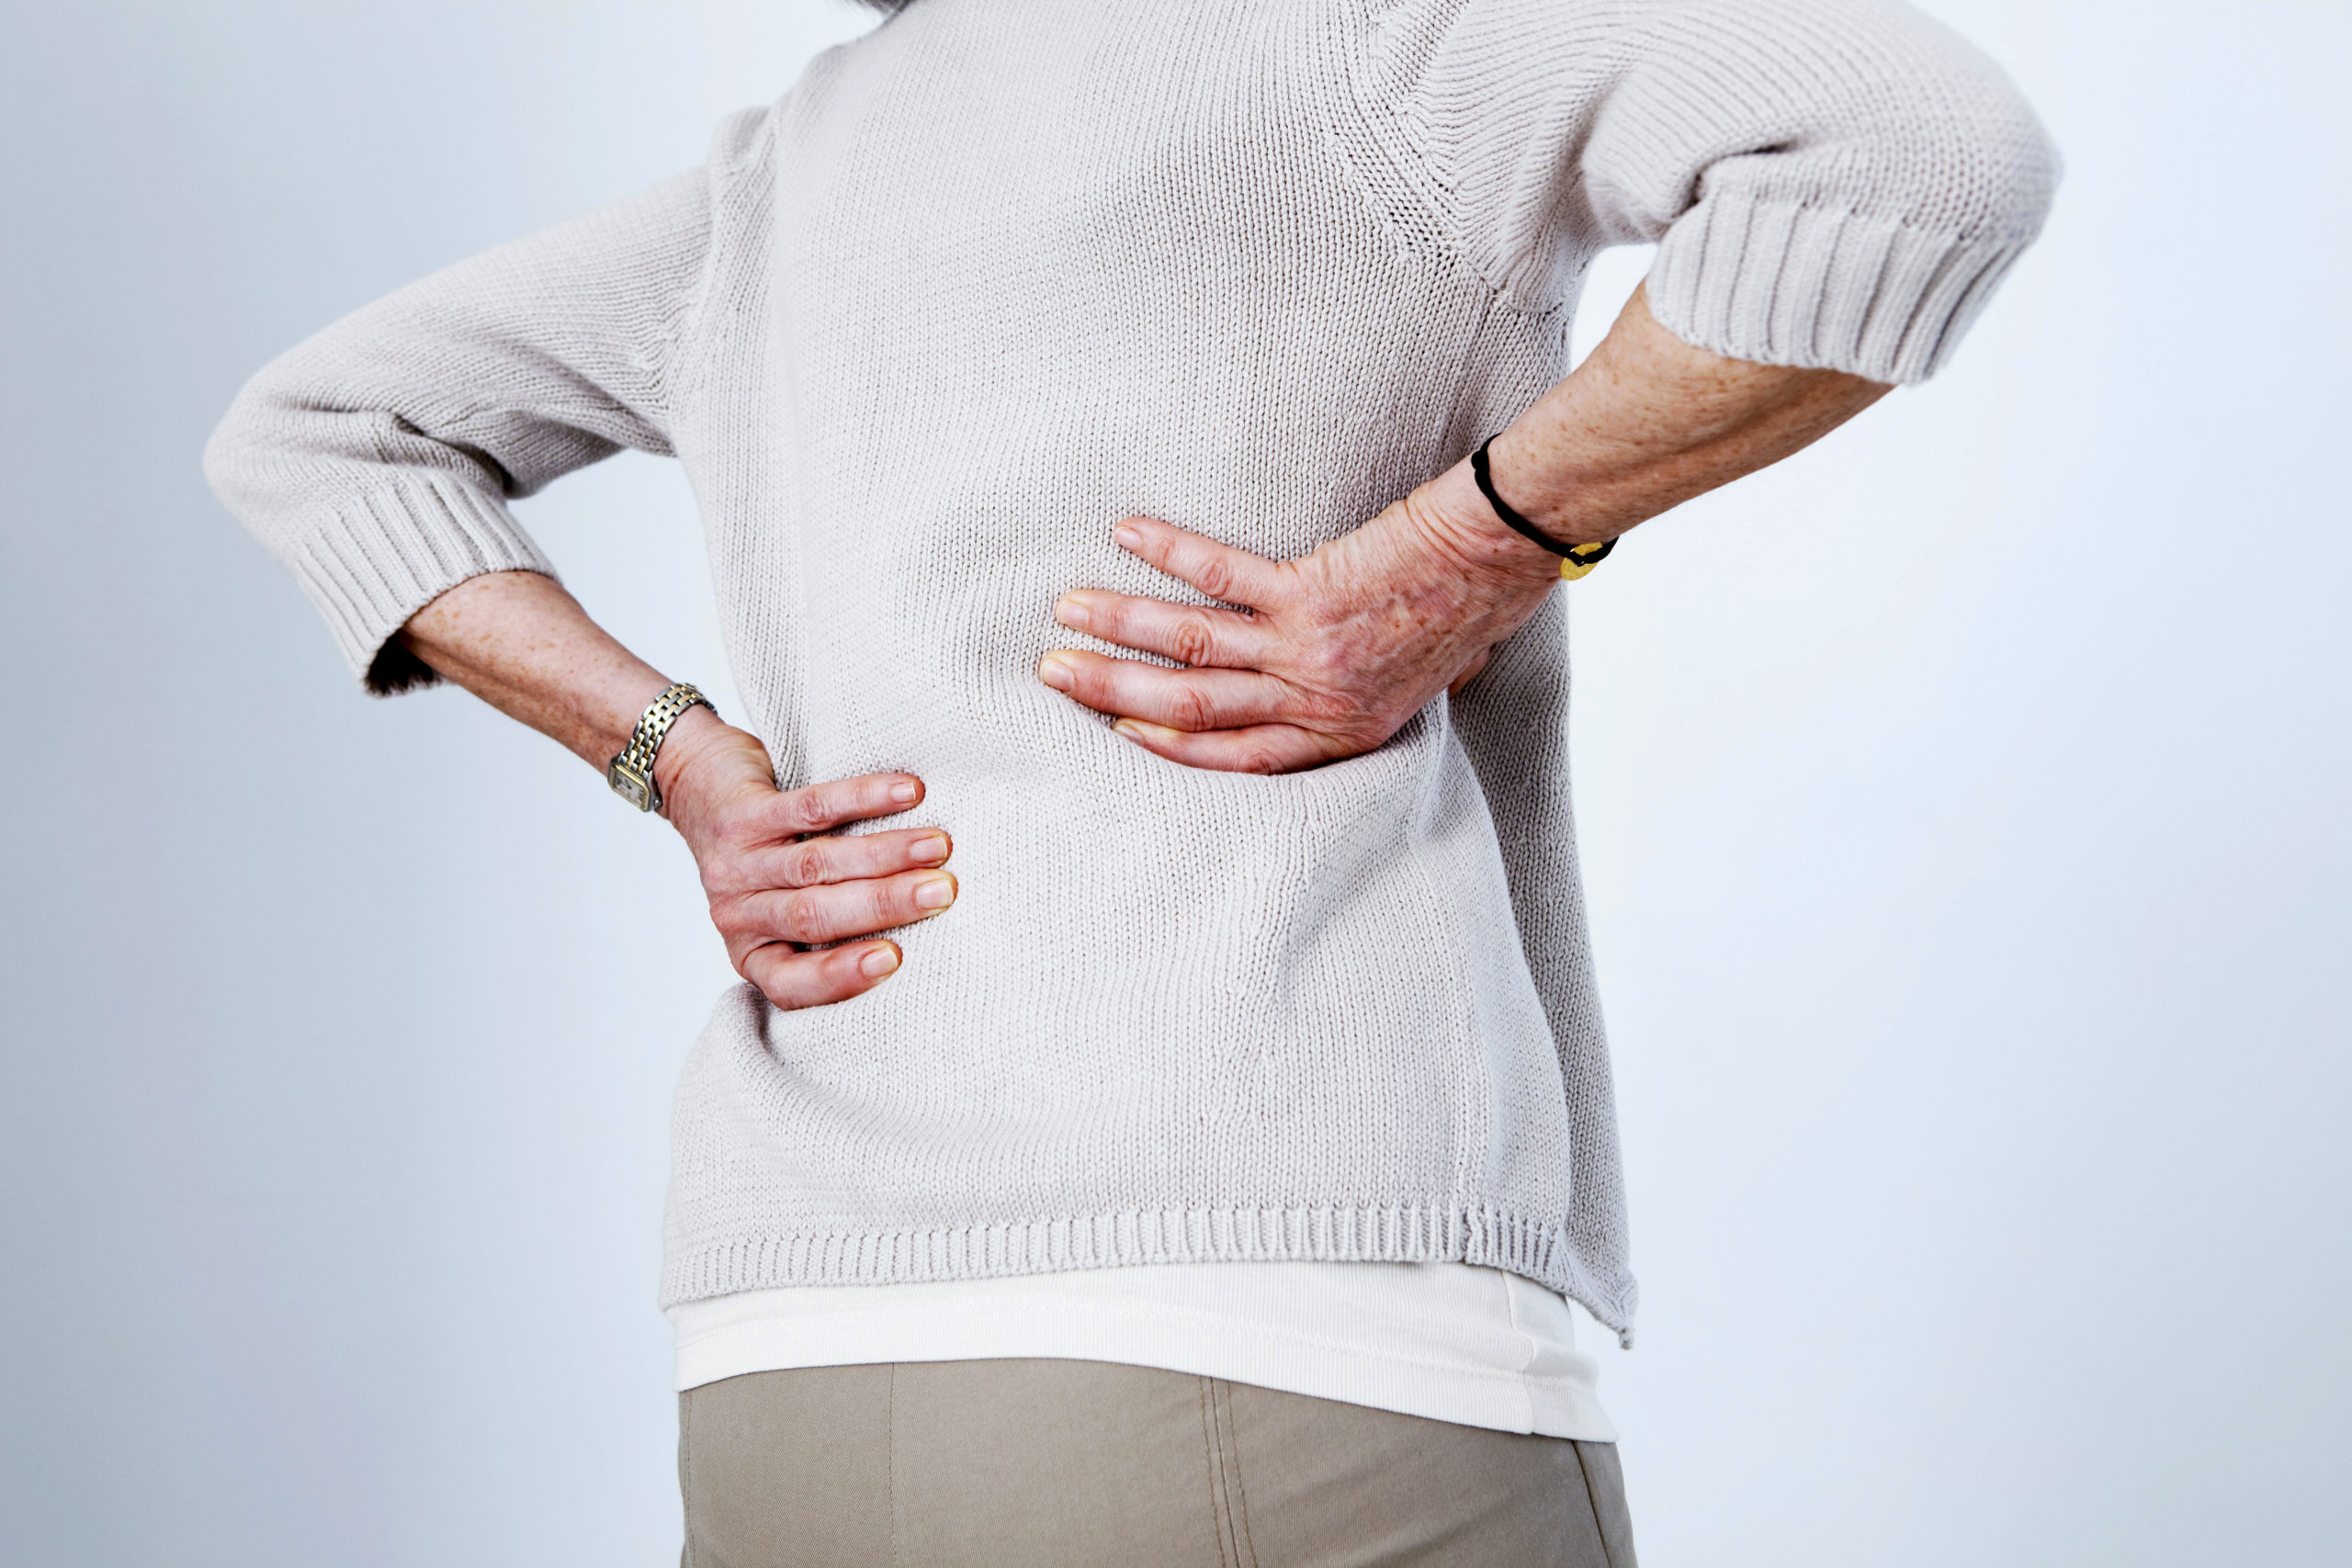 15 Things You Didn’t Know About Back Pain